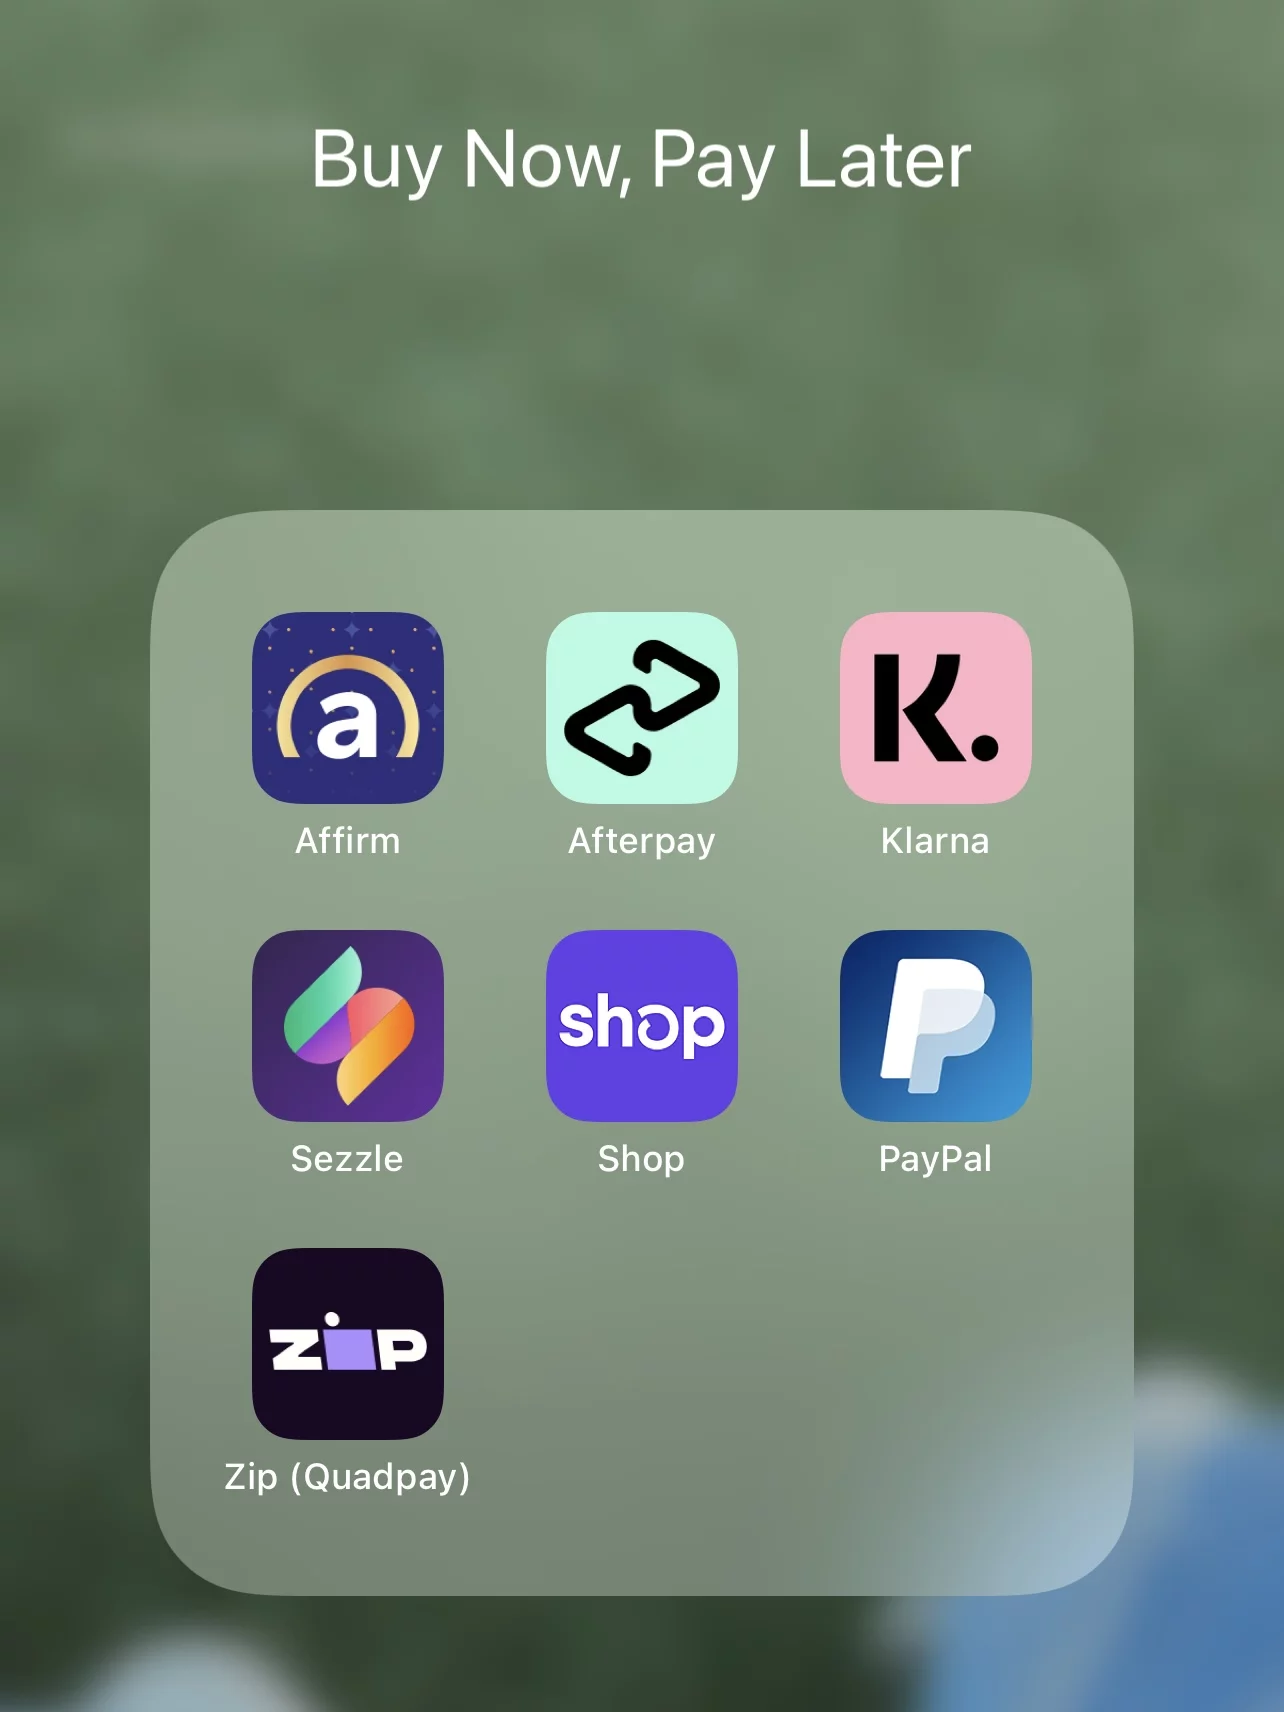 How to Create a Buy Now Pay Later App Like Klarna or Afterpay